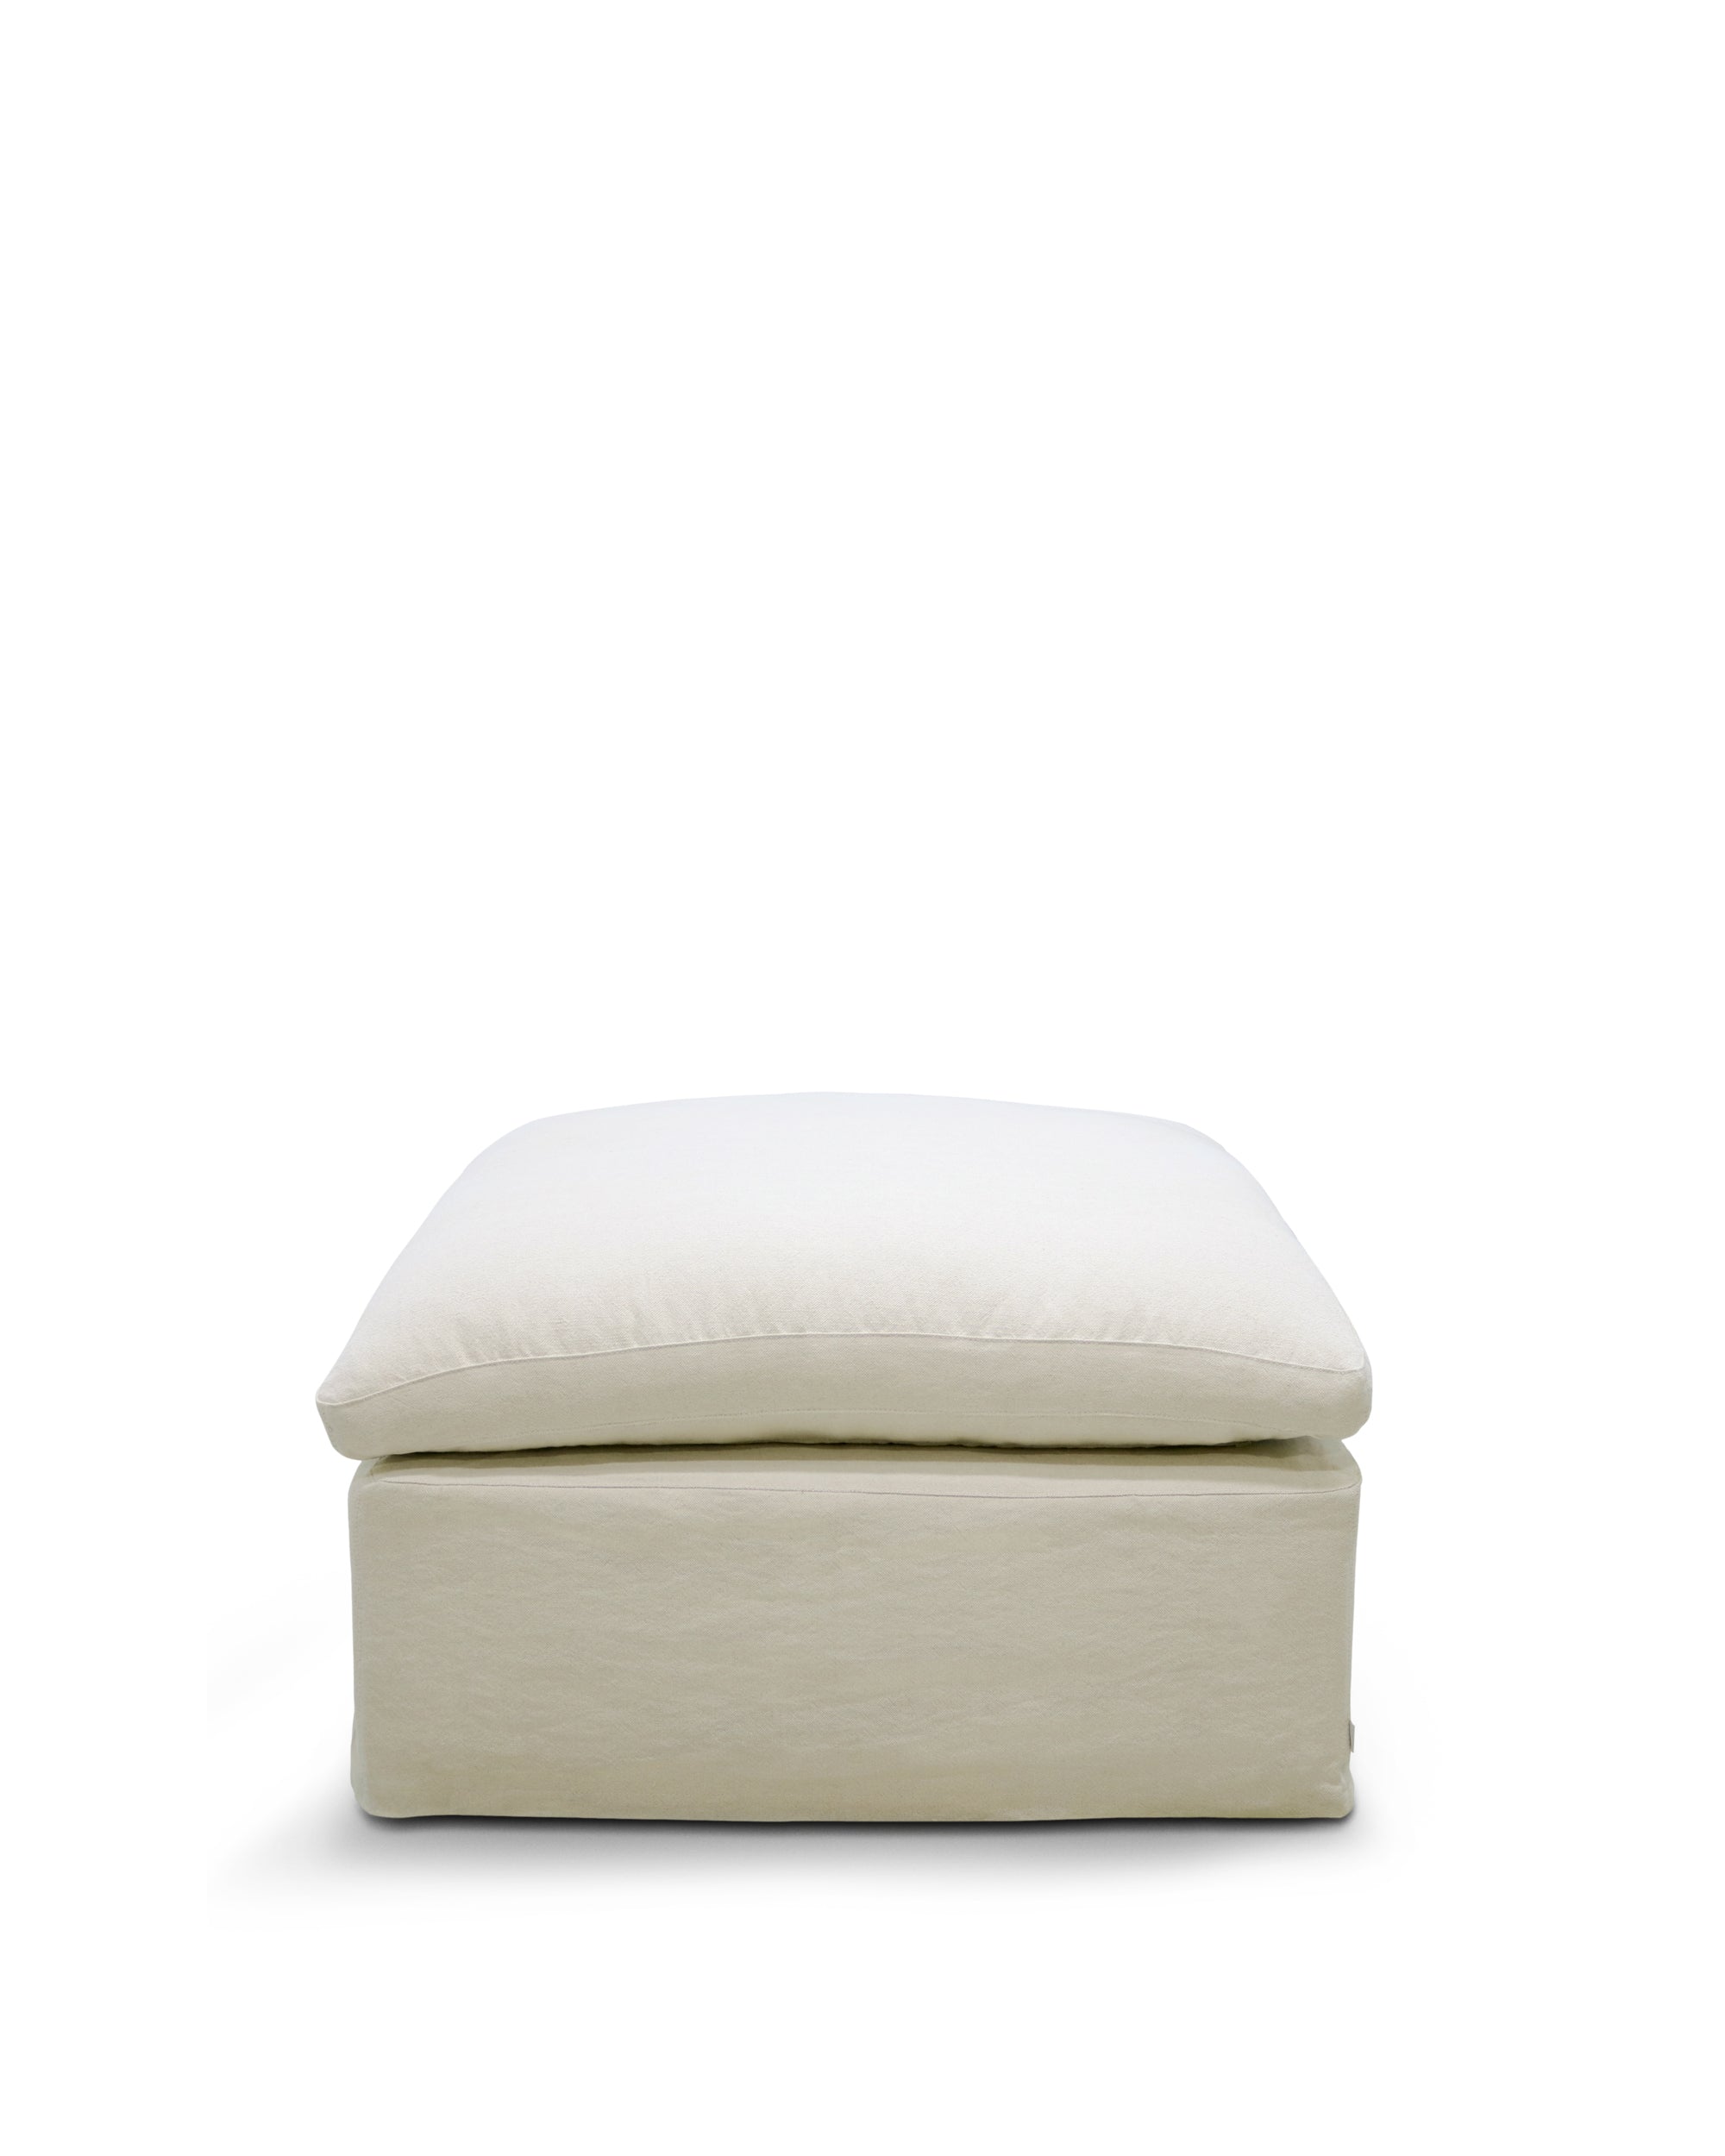 Zenira footstool with removable cover and beige cotton and linen cushion, 90 x 90 cm, 100% FSC